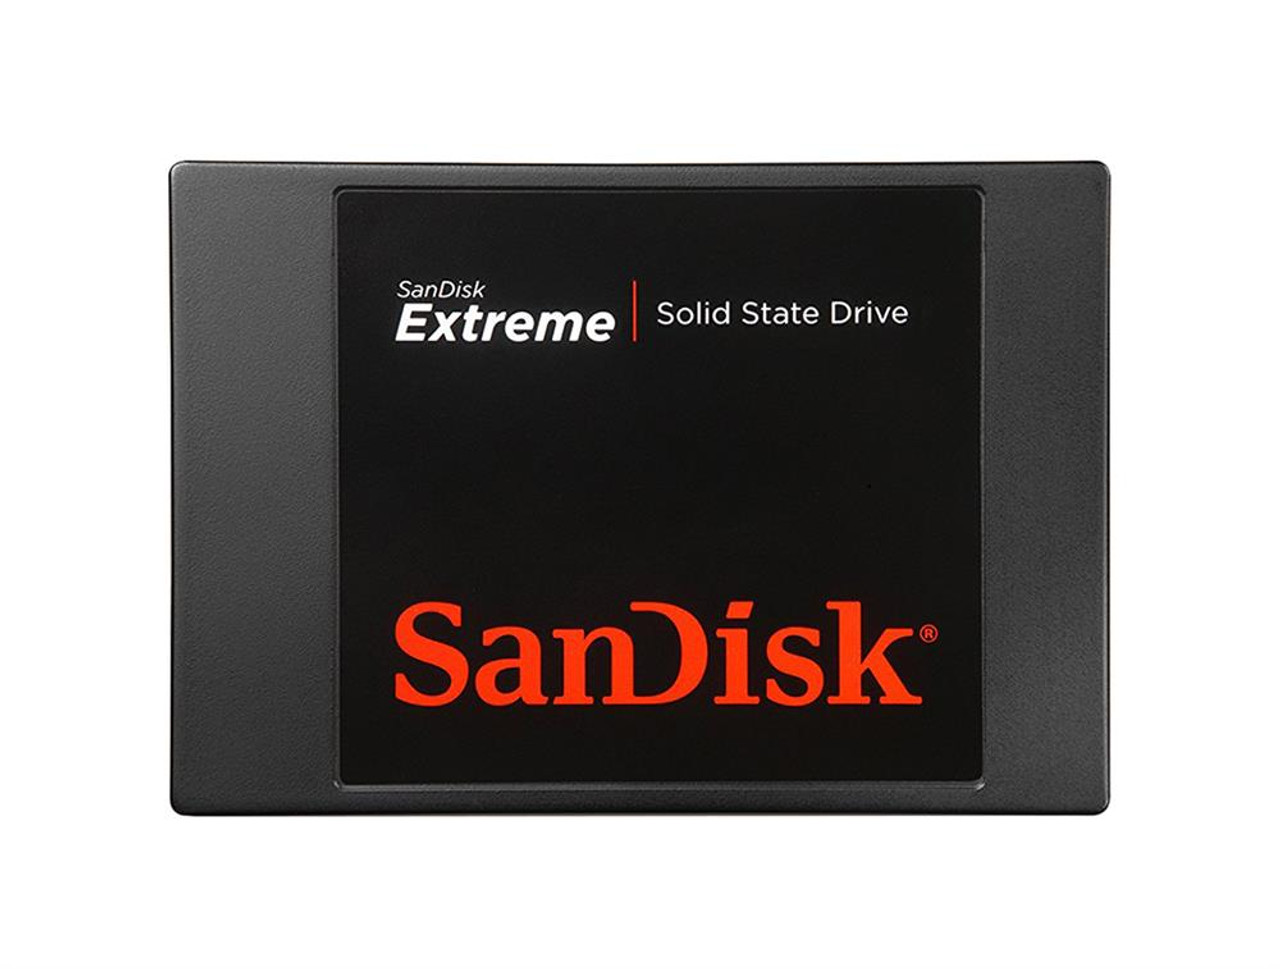 101743 SanDisk Extreme 240GB MLC SATA 6Gbps 2.5-inch Internal Solid State Drive (SSD)